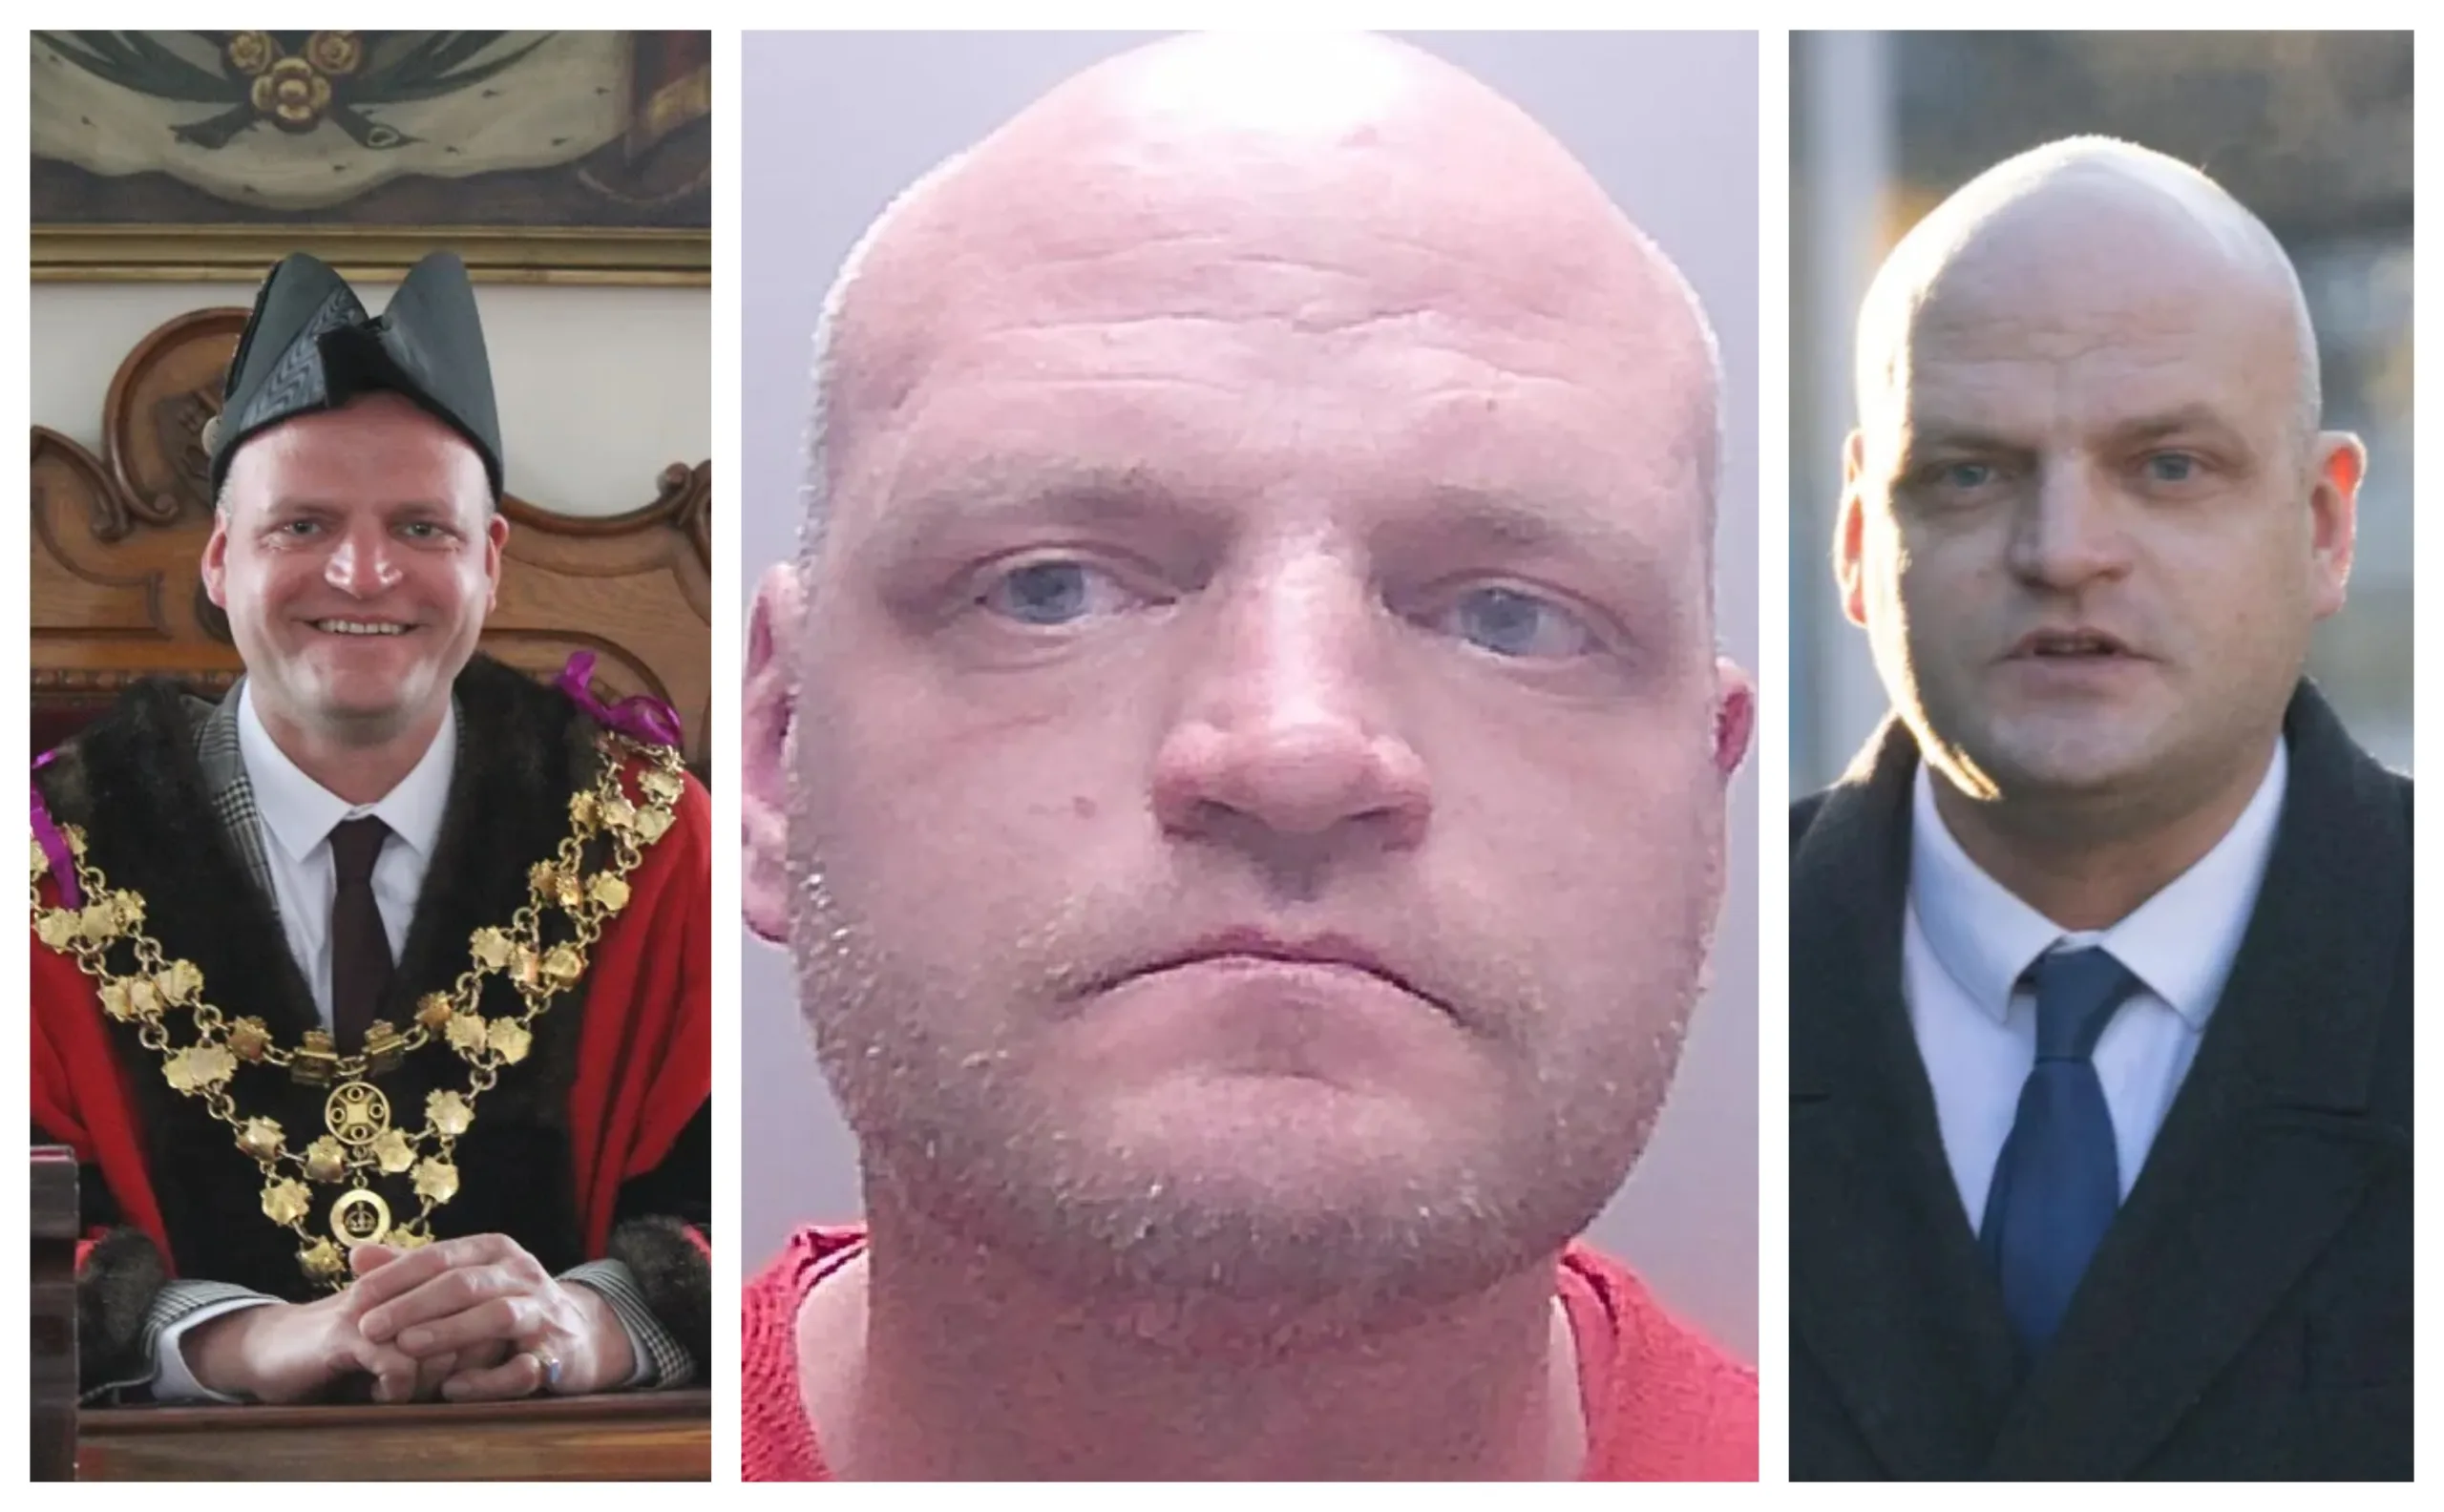 Rapist former Mayor Aigars Balsevics (left) as mayor, (centre) custody photo and (right) arriving for a court appearance at Peterborough.